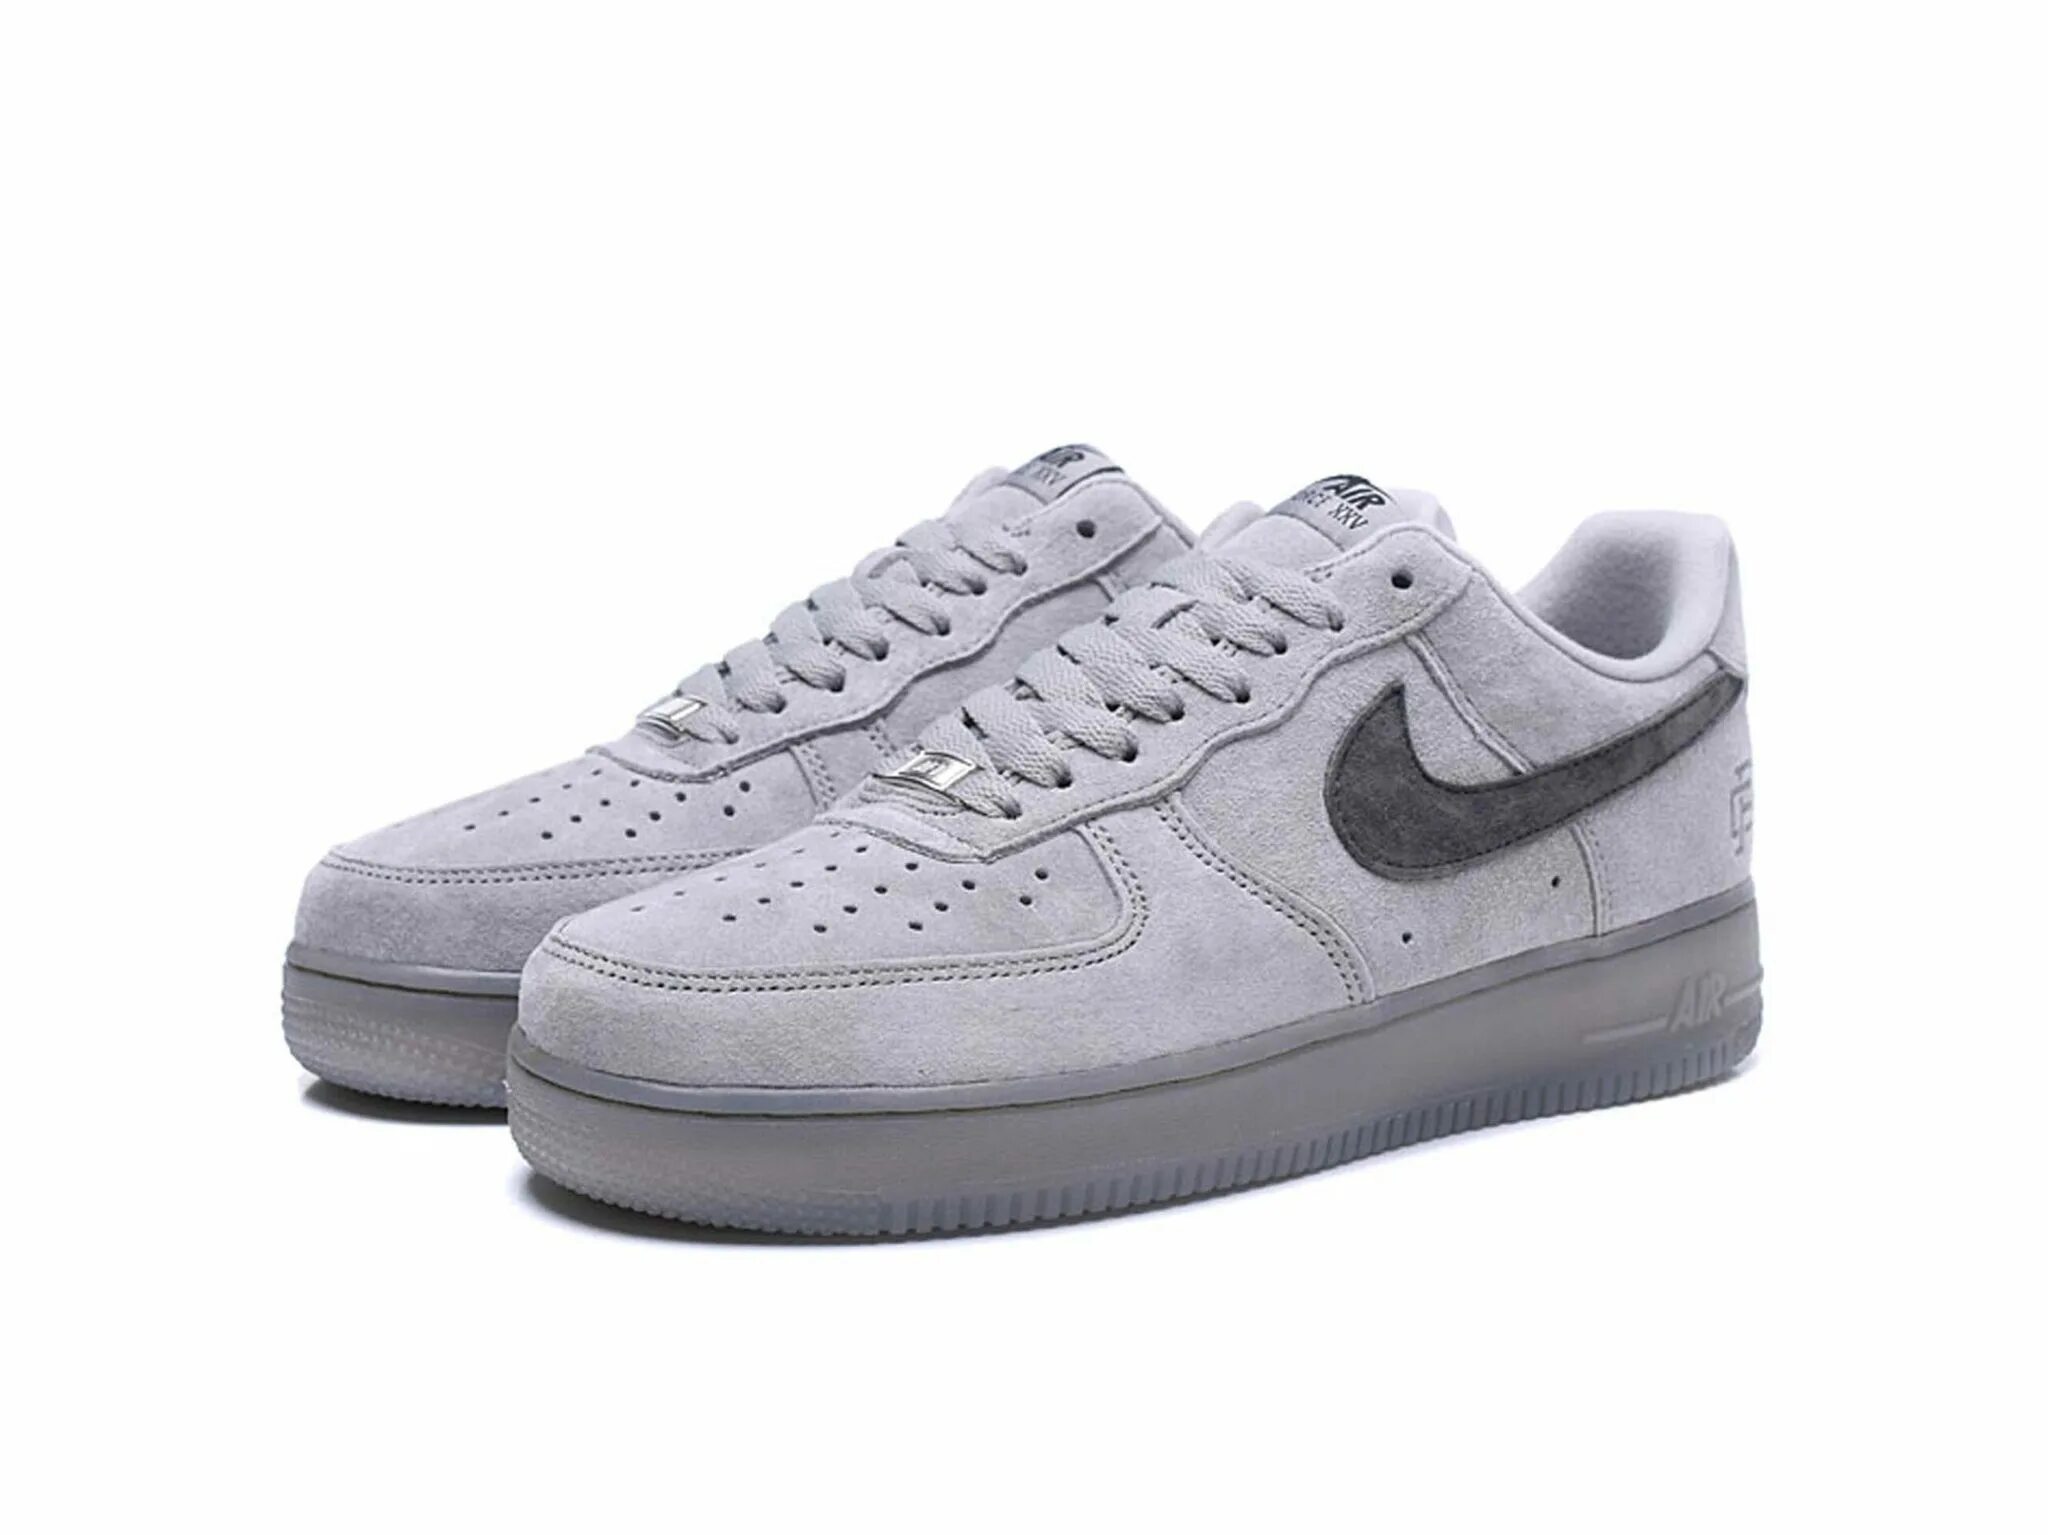 Nike Air Force 1 Low Grey x reigning Champ. Nike Air Force 1 Low Grey. Nike Air Force 1 Low reigning Champ. Nike Air Force 1 Low reigning Champ Grey.